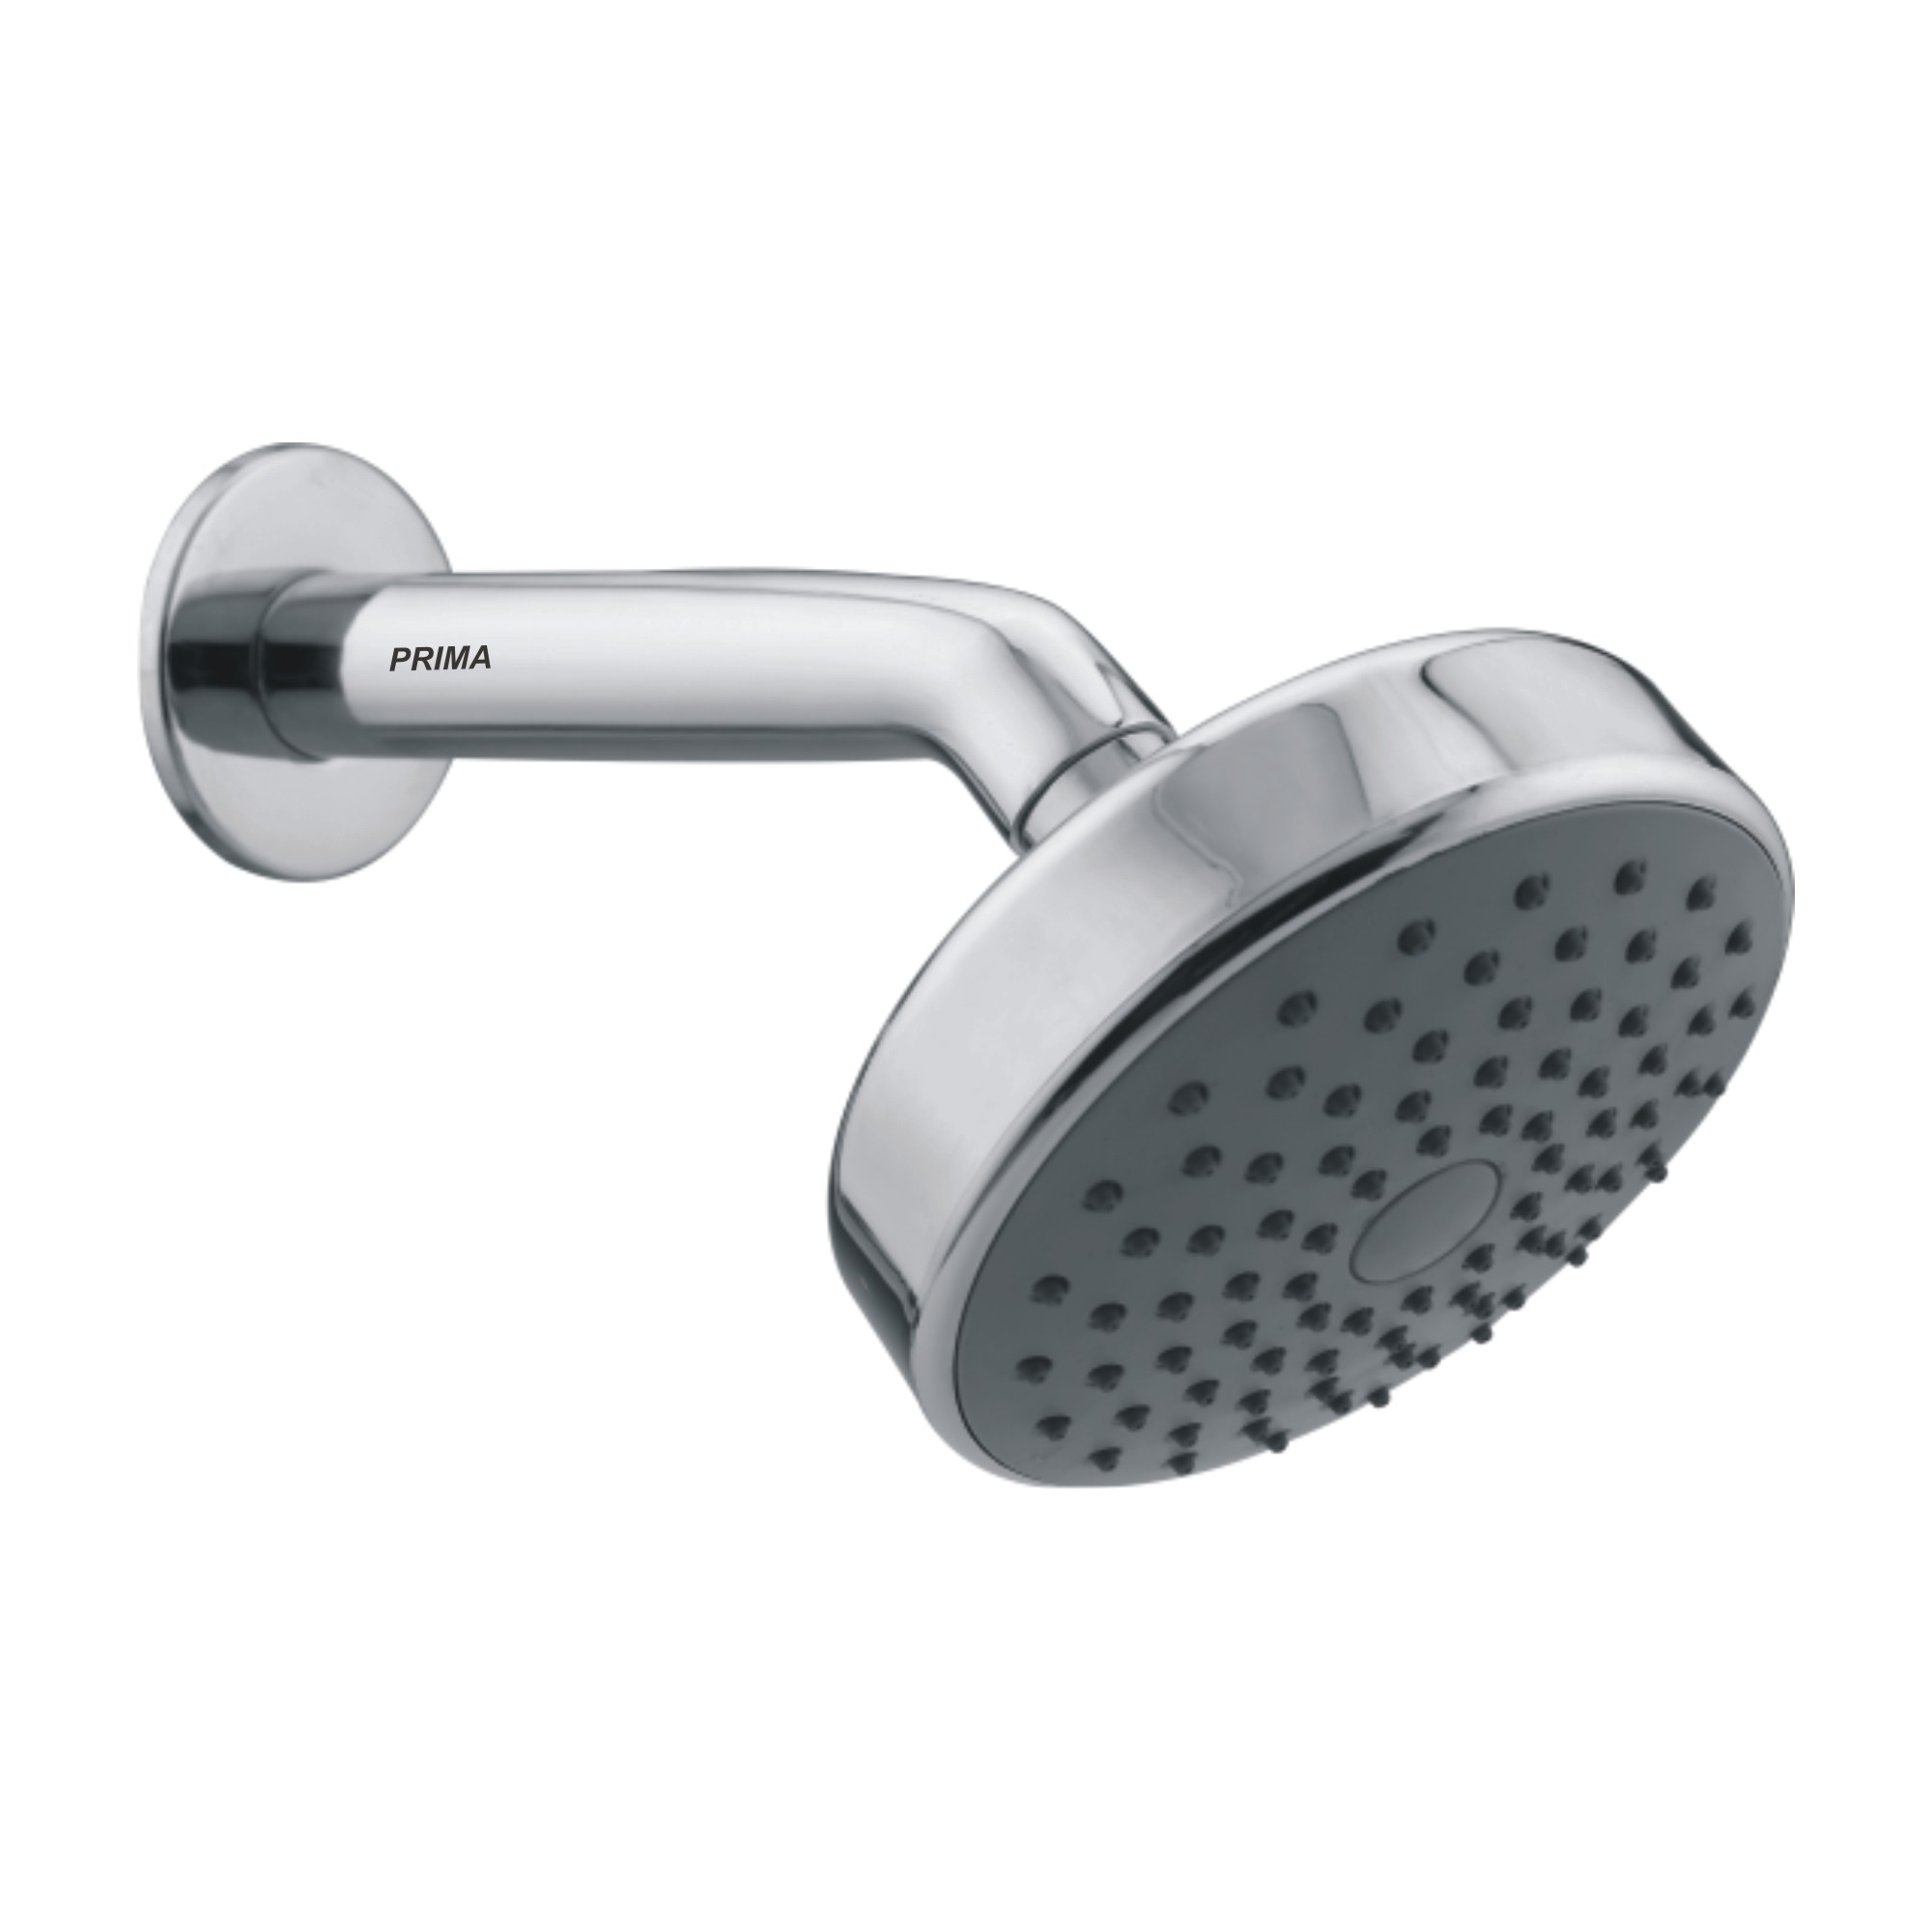 C.P OVERHEAD SHOWER ROUND WITH ARM ( 125 MM ) - OCTAVIA 